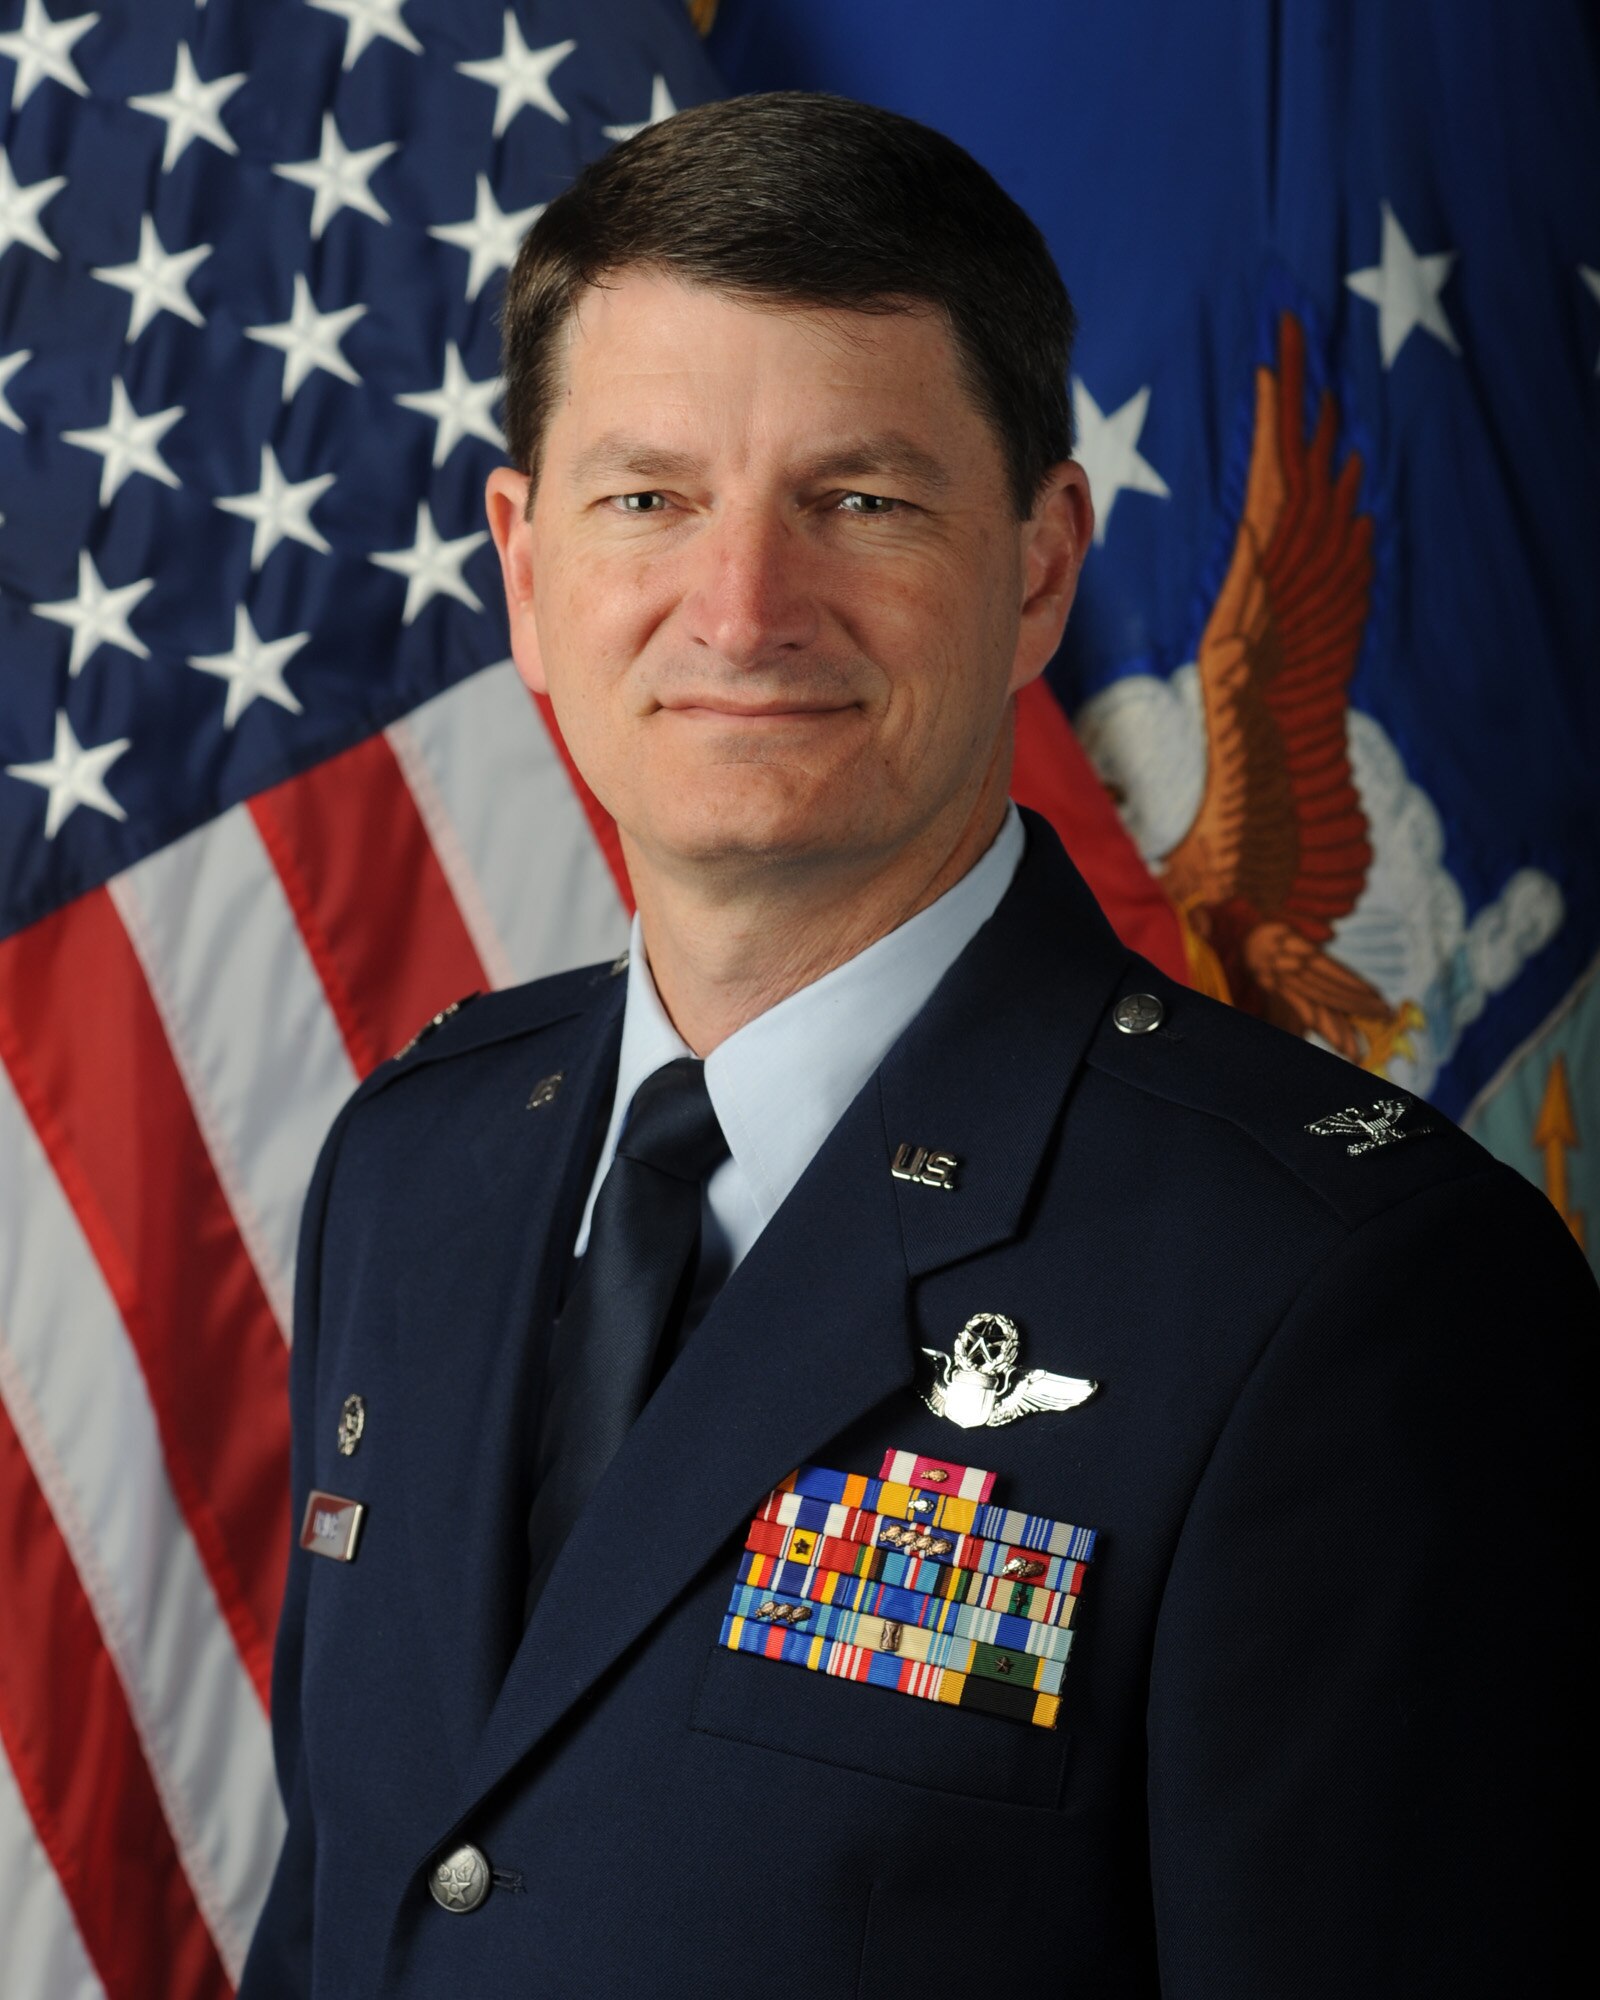 Col. Michael Francis, the current commander of the 131st Bomb Wing, will become the new assistant adjutant general-Air for the Missouri National Guard.  (Courtesy photo)

